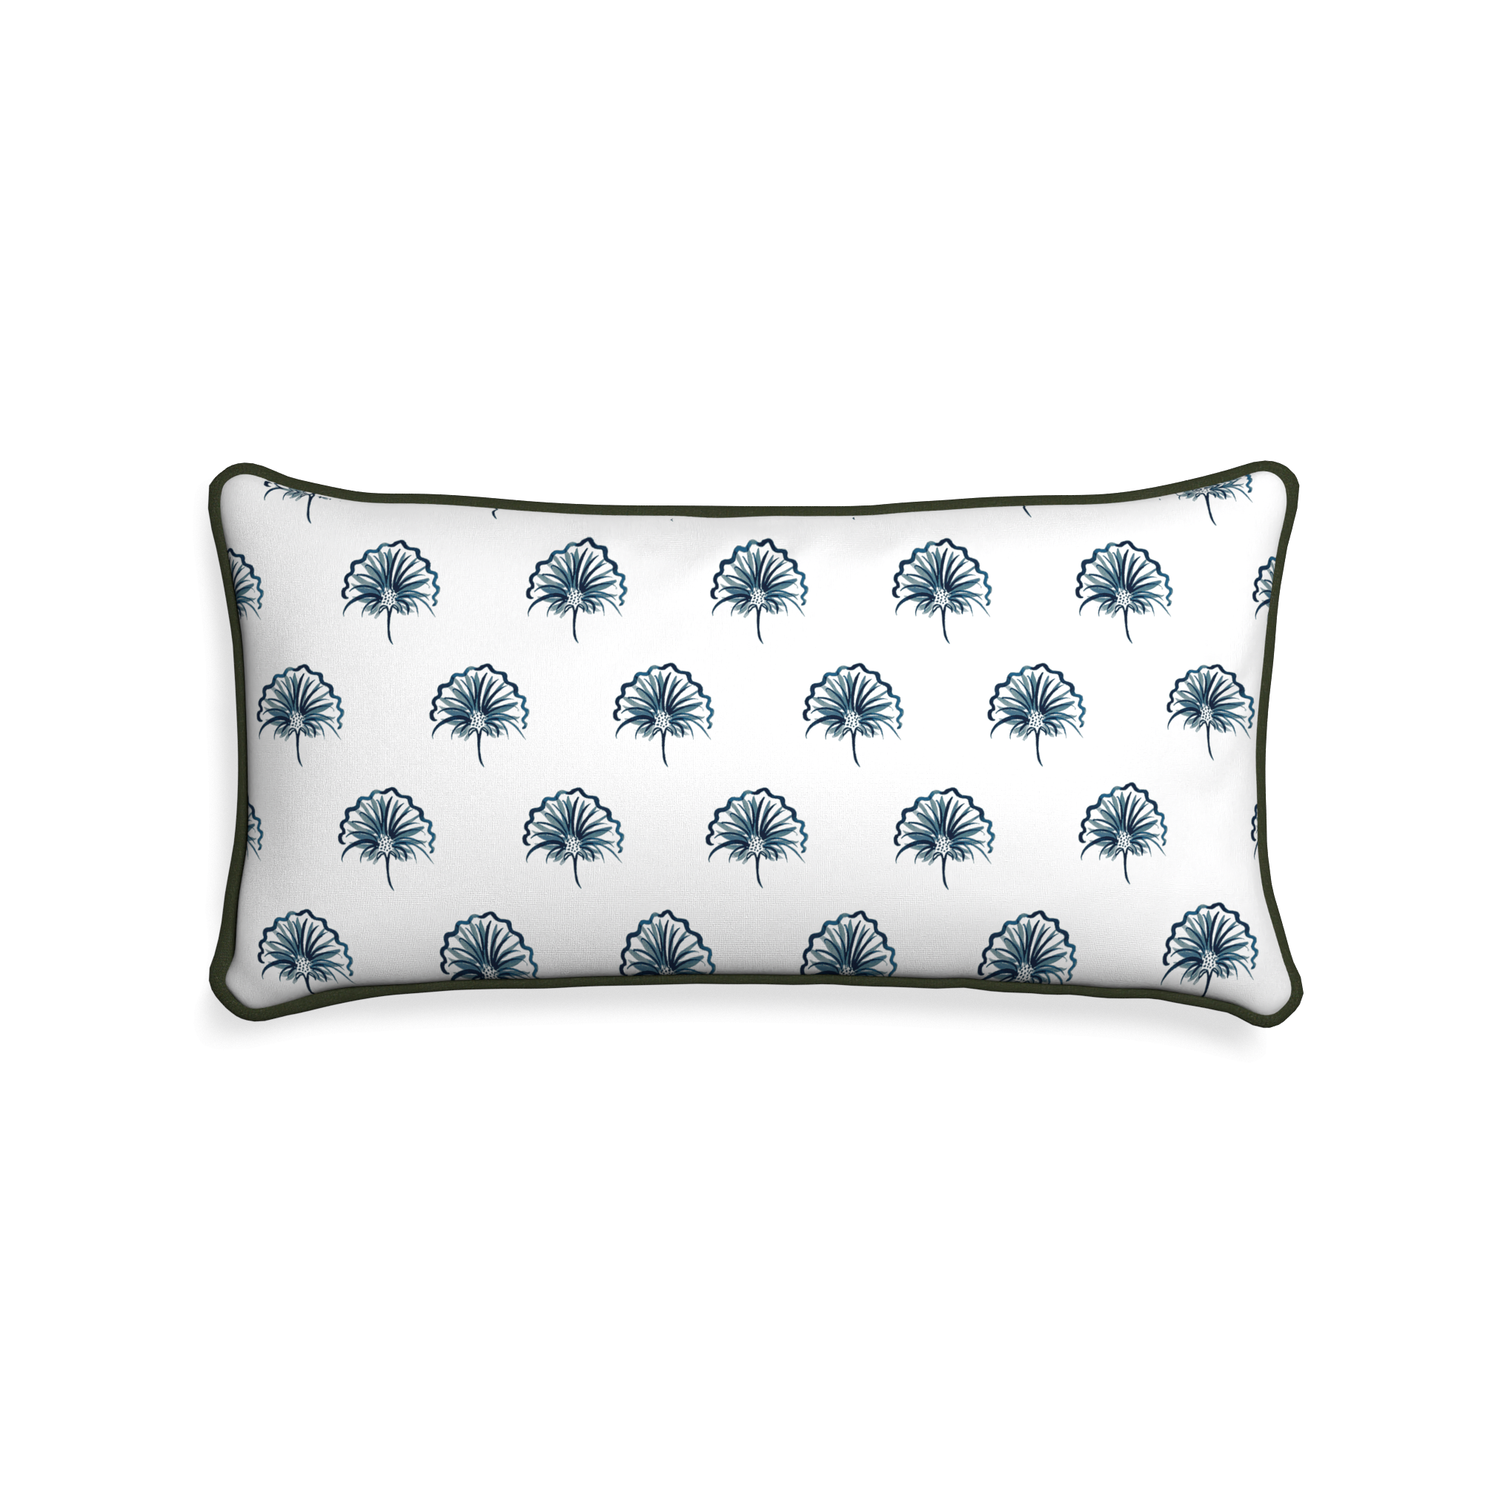 Midi-lumbar penelope midnight custom floral navypillow with f piping on white background